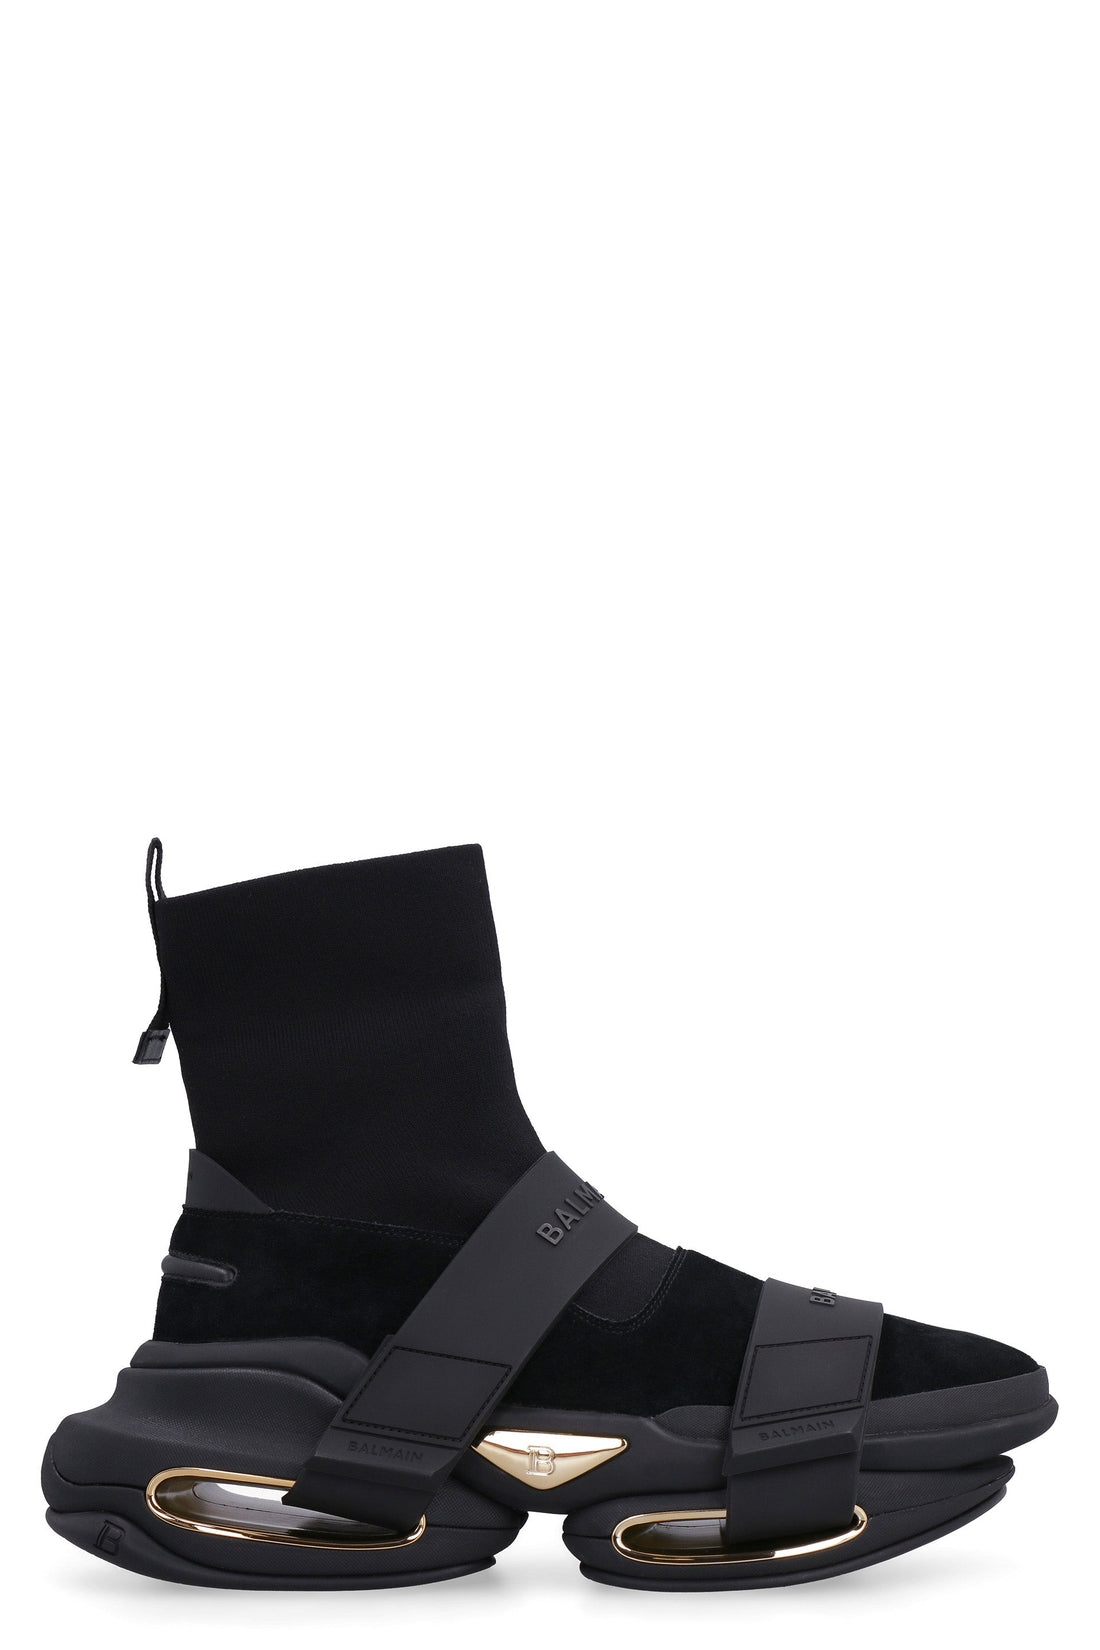 Balmain-OUTLET-SALE-B Bold leather high-top sneakers-ARCHIVIST